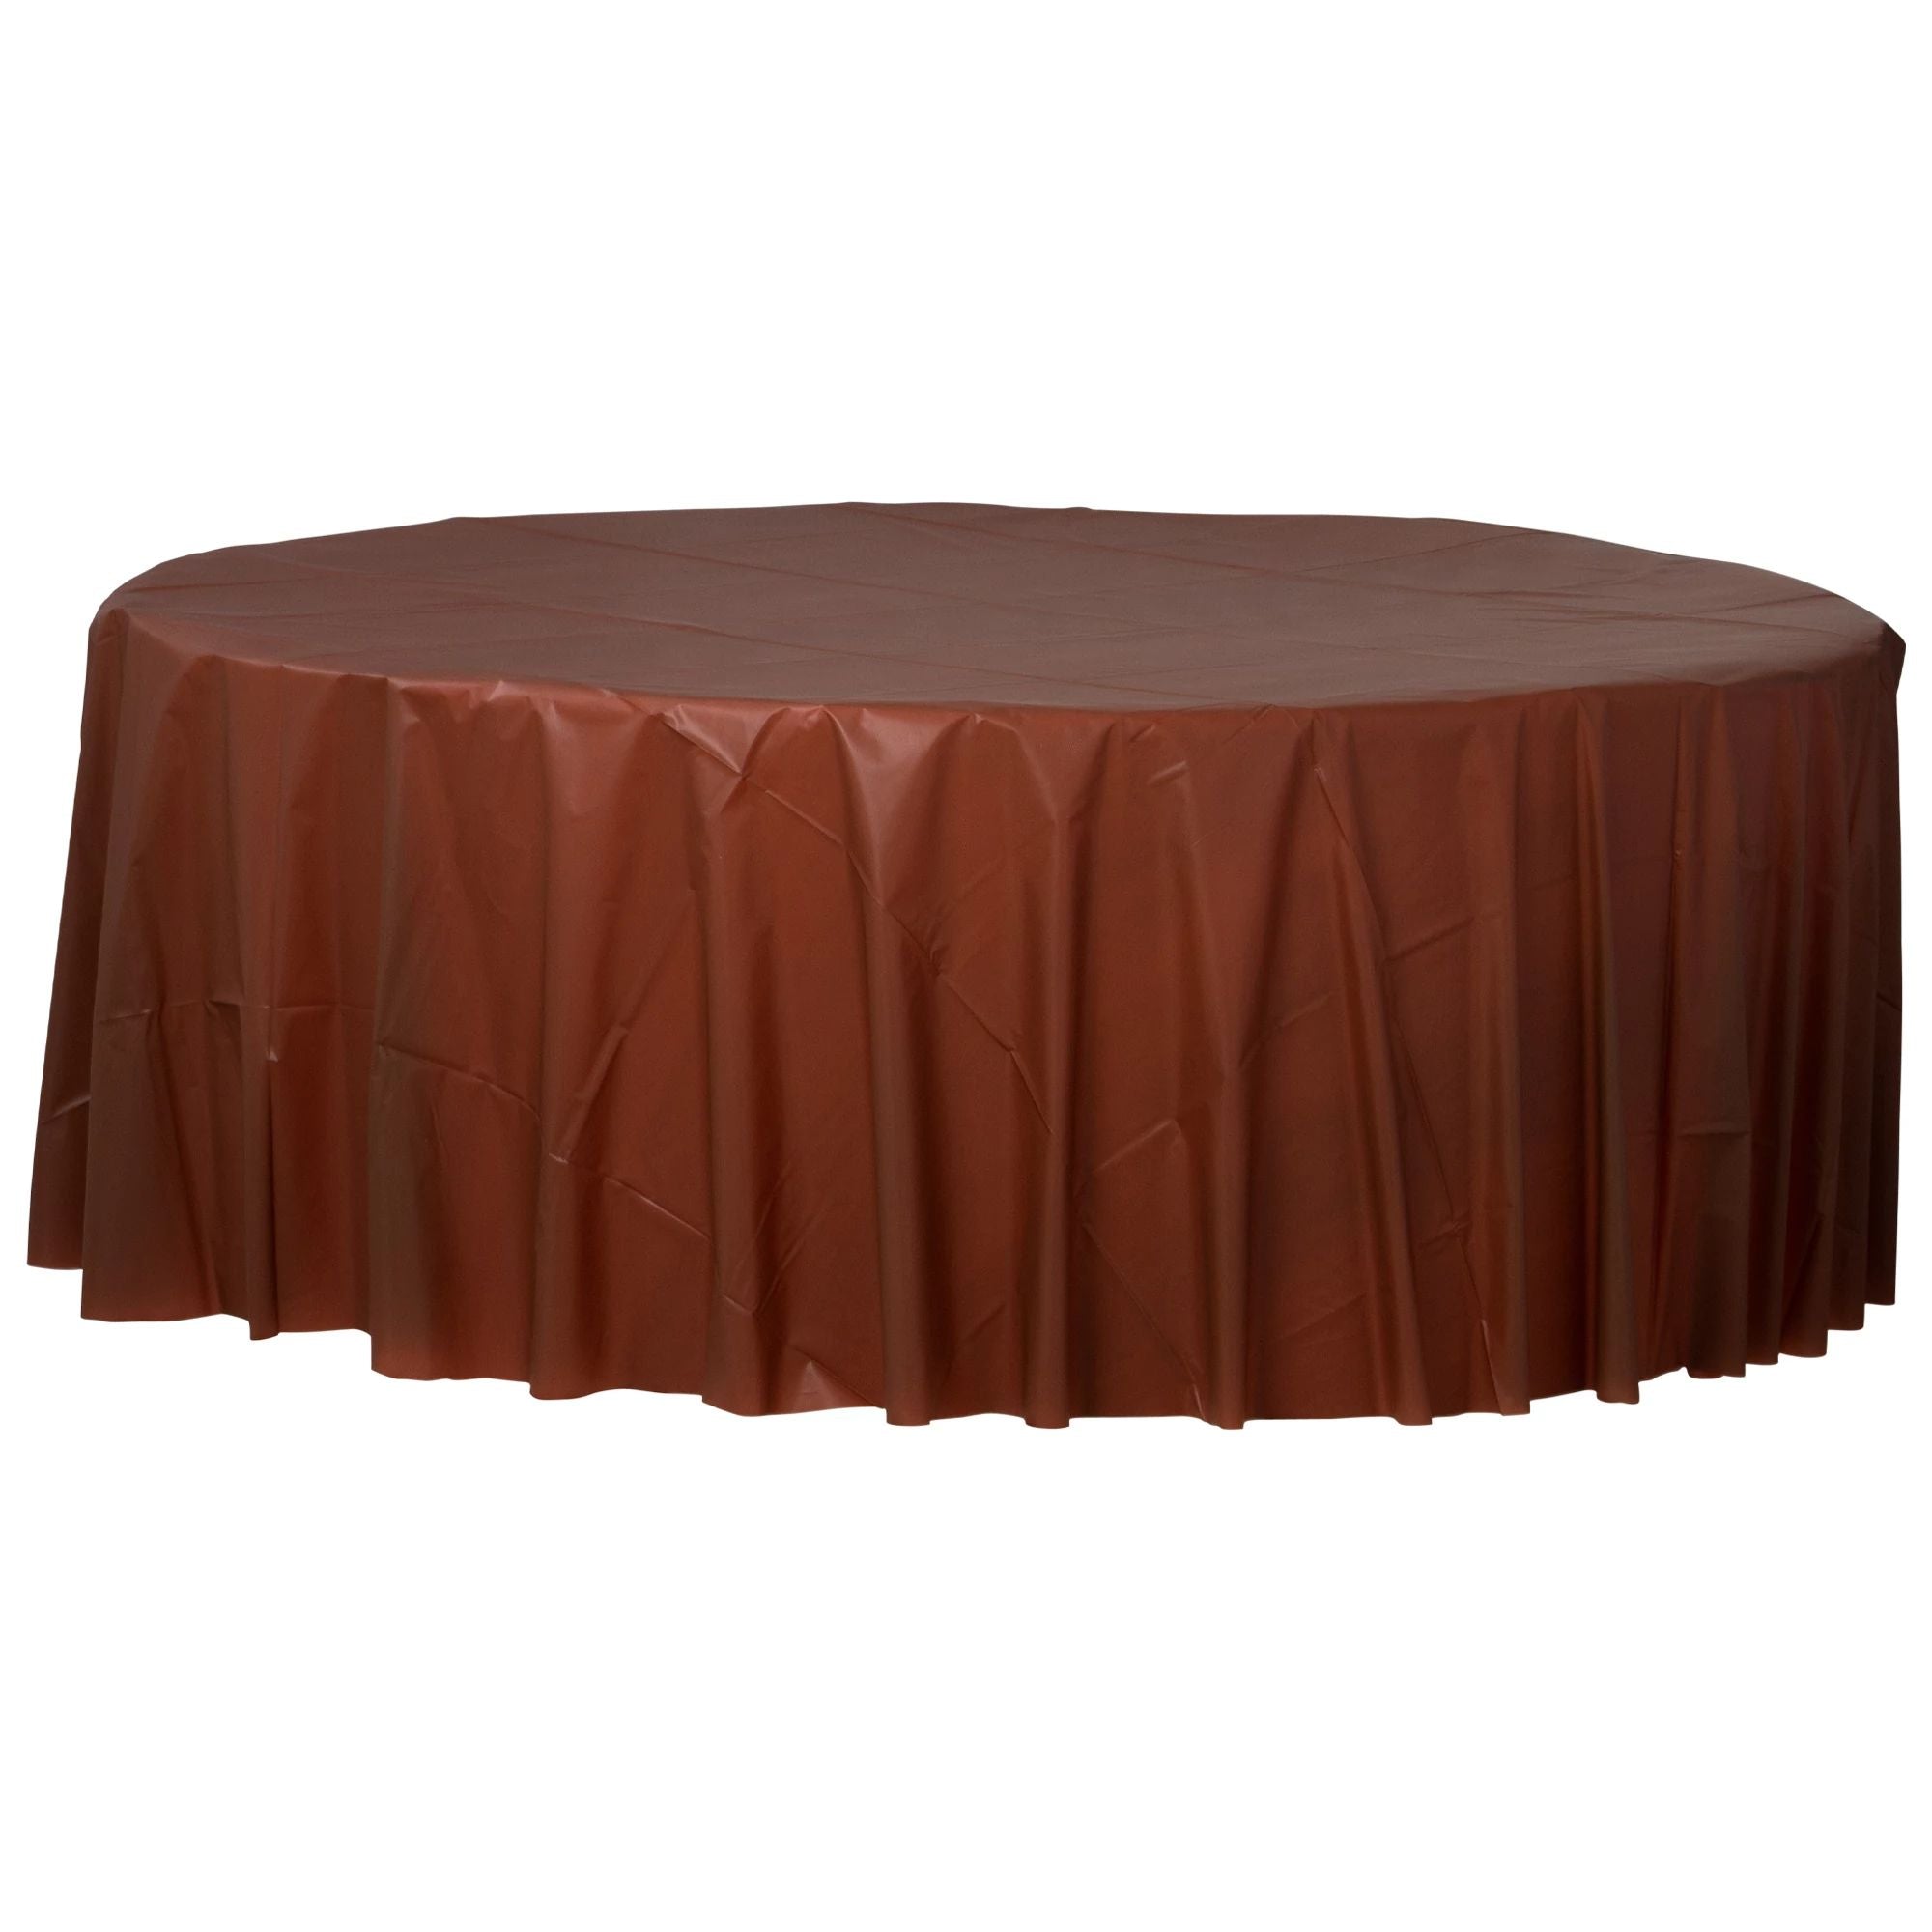 Round Plastic Table Cover - Chocolate Brown - 84"